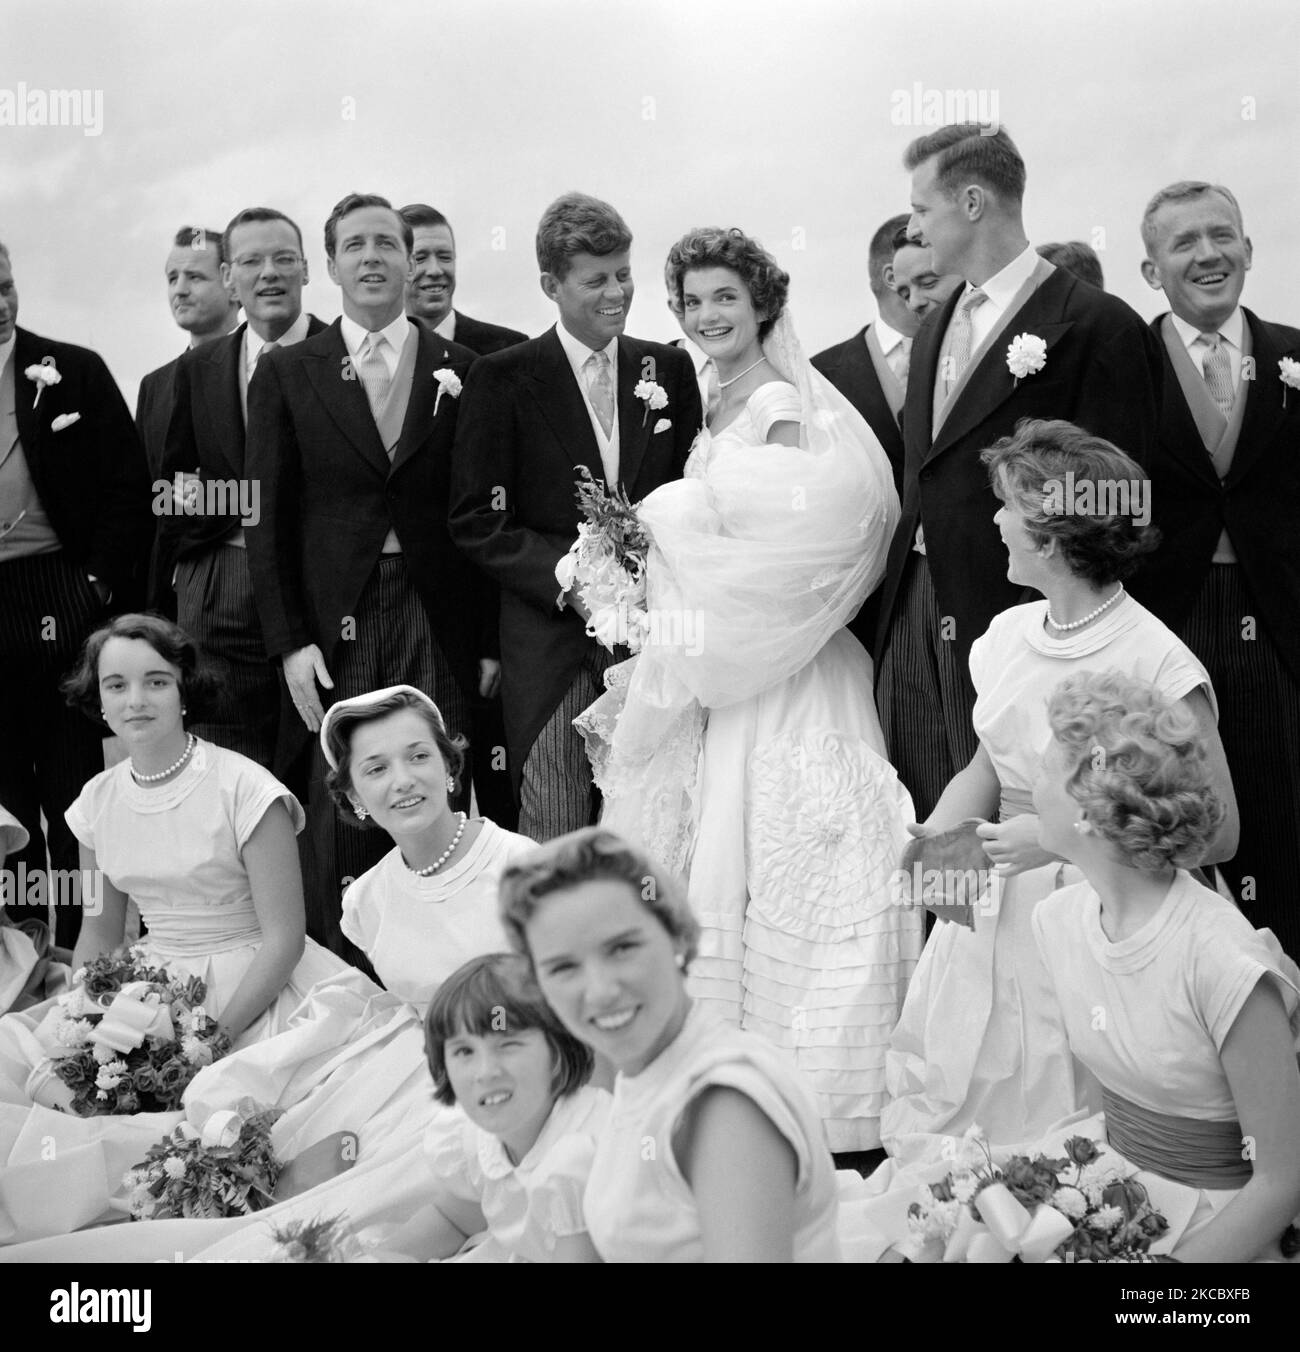 Jackie Bouvier Kennedy and John F. Kennedy surrounded by their wedding party. Stock Photo